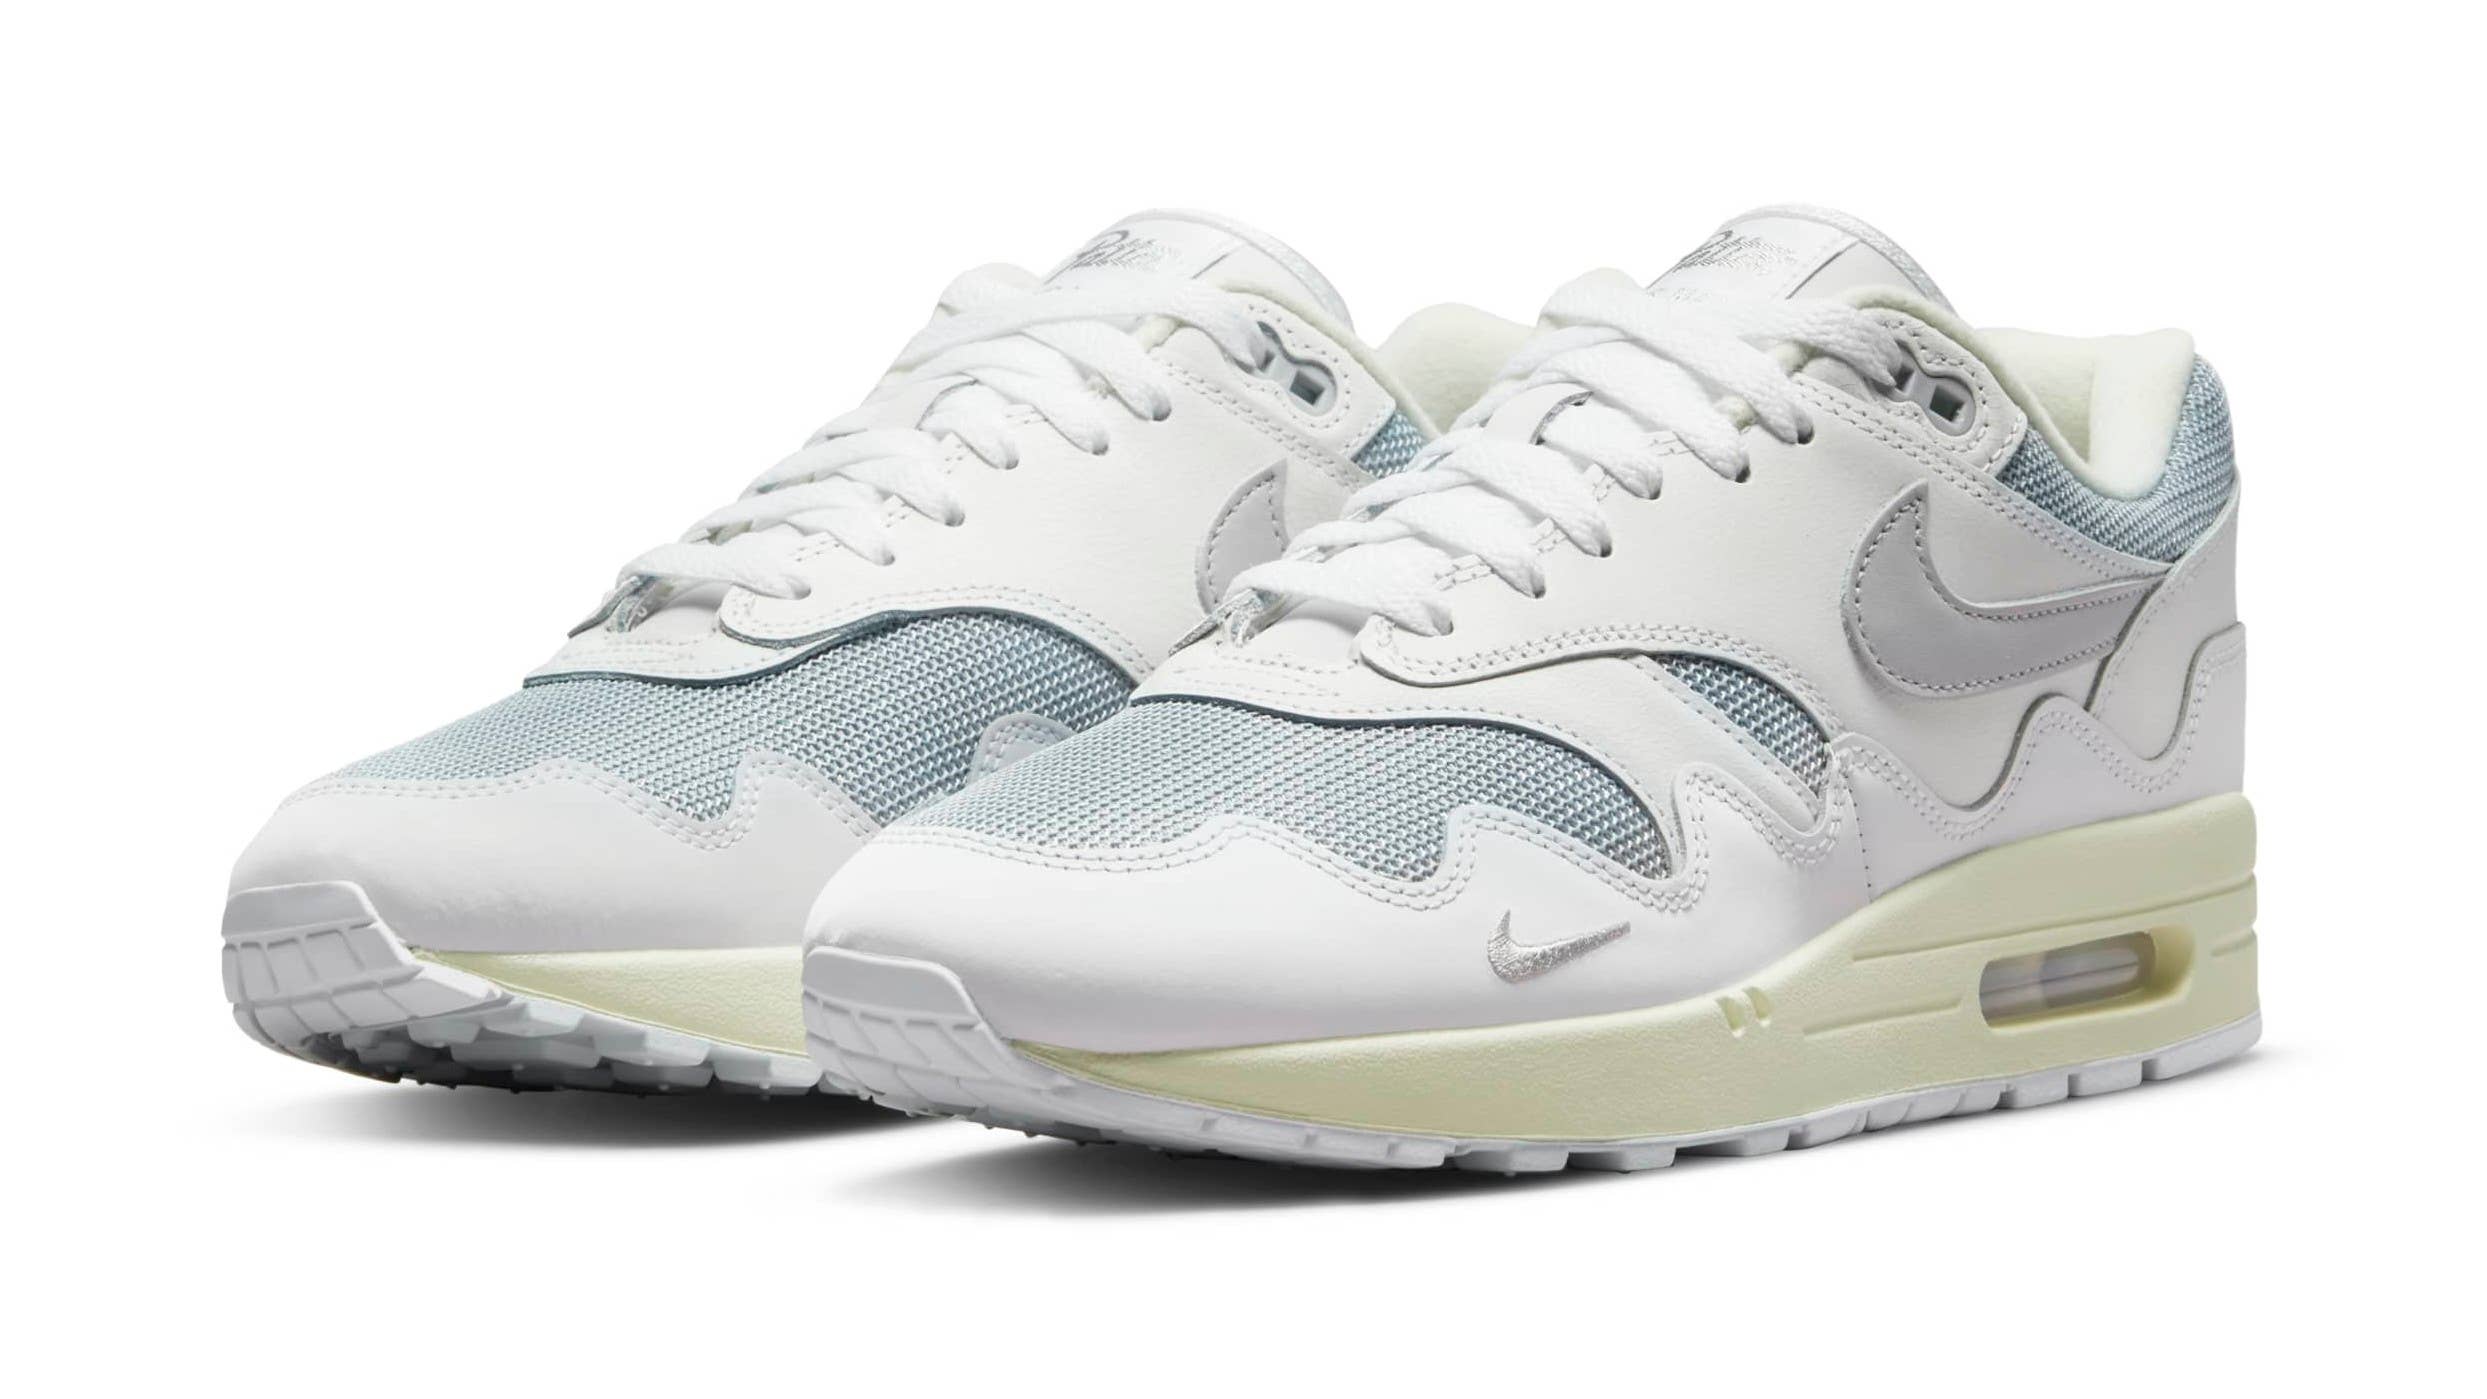 Hover Fragiel Atletisch Patta's 'Pure Platinum' Nike Air Max 1 Collab Releases This Week | Complex